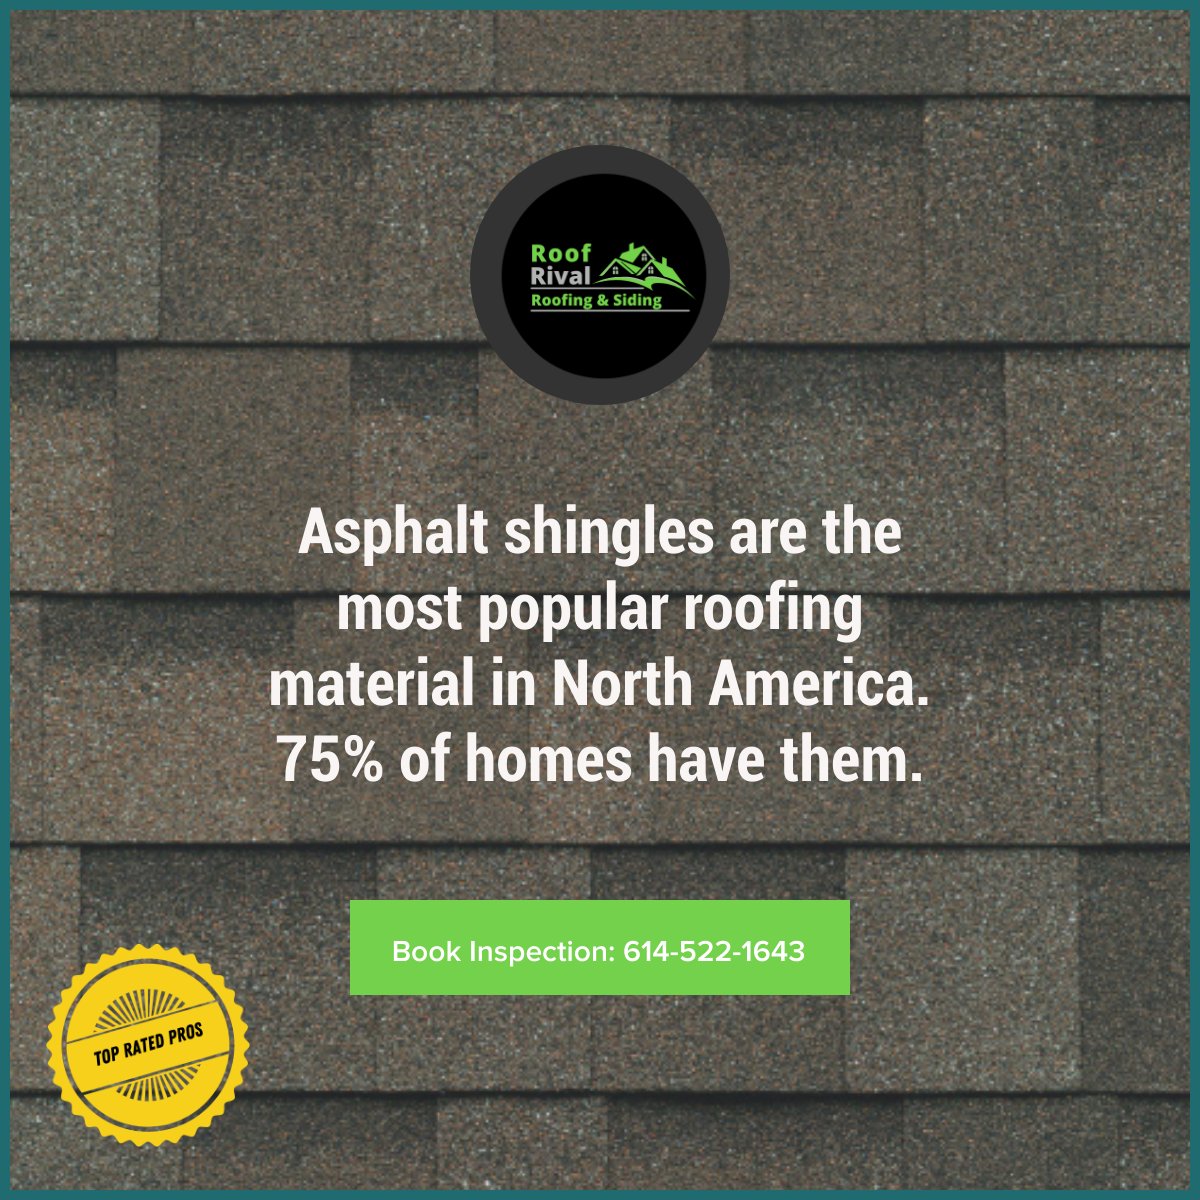 About 75% of homes in North America have asphalt shingles. Even though it's a newer material in the roofing industry (relatively speaking anyway), it's the most popular in use in the USA and Canada.

#RoofRival #AsphaltShingles #ColumbusOhioRoofingPros